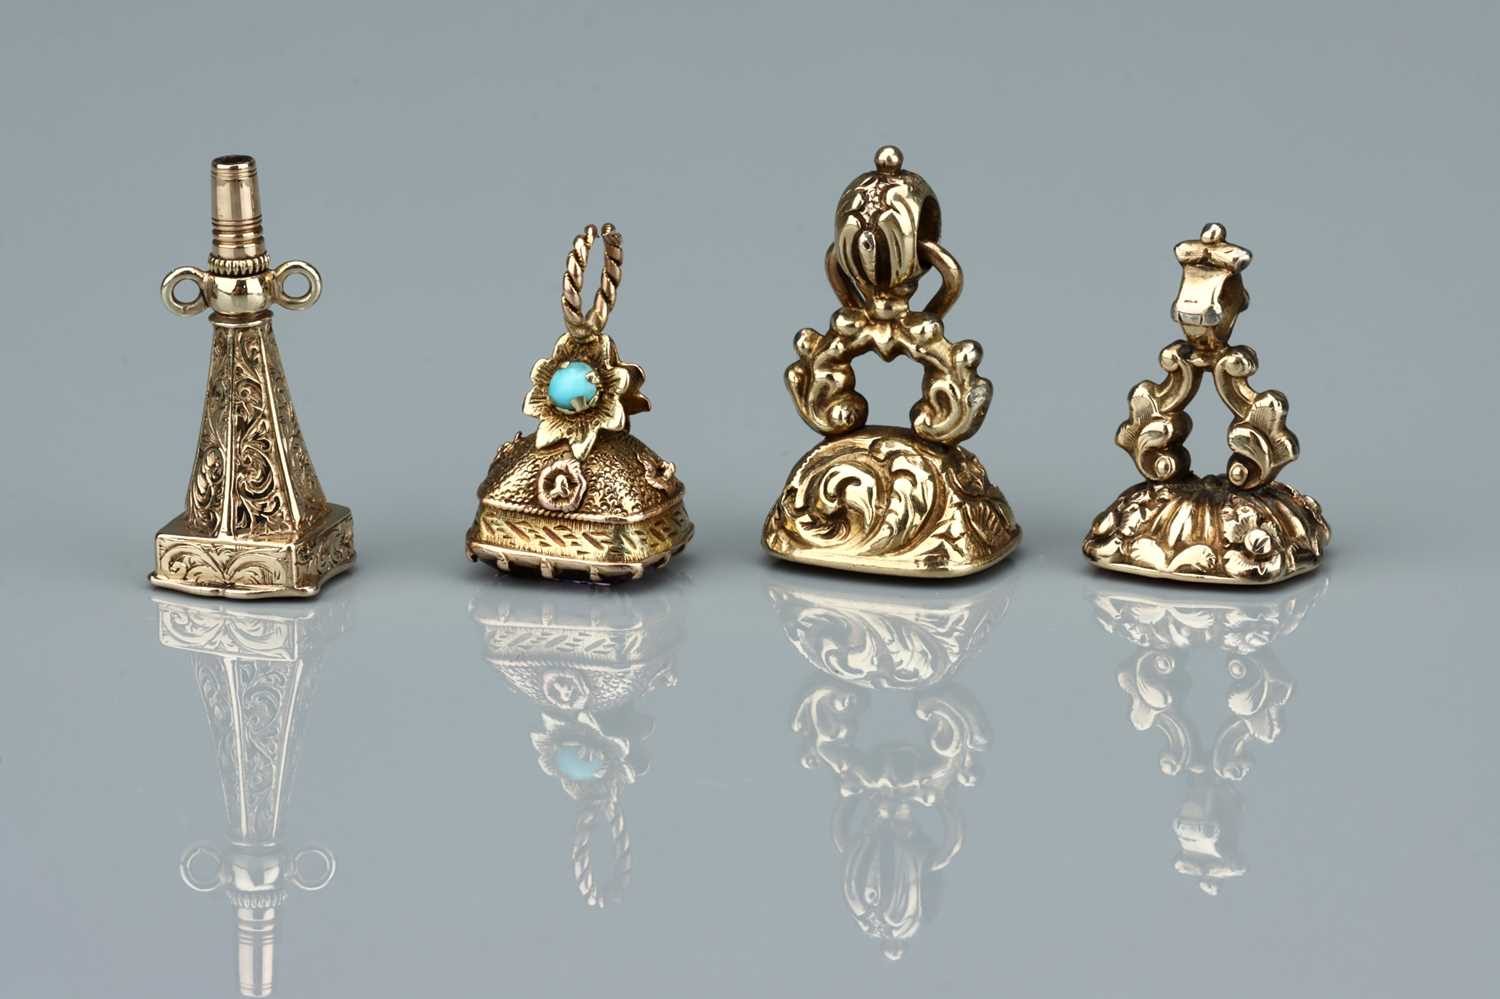 Lot 136 - A Collection of Four Victorian Fob Seals and Charms